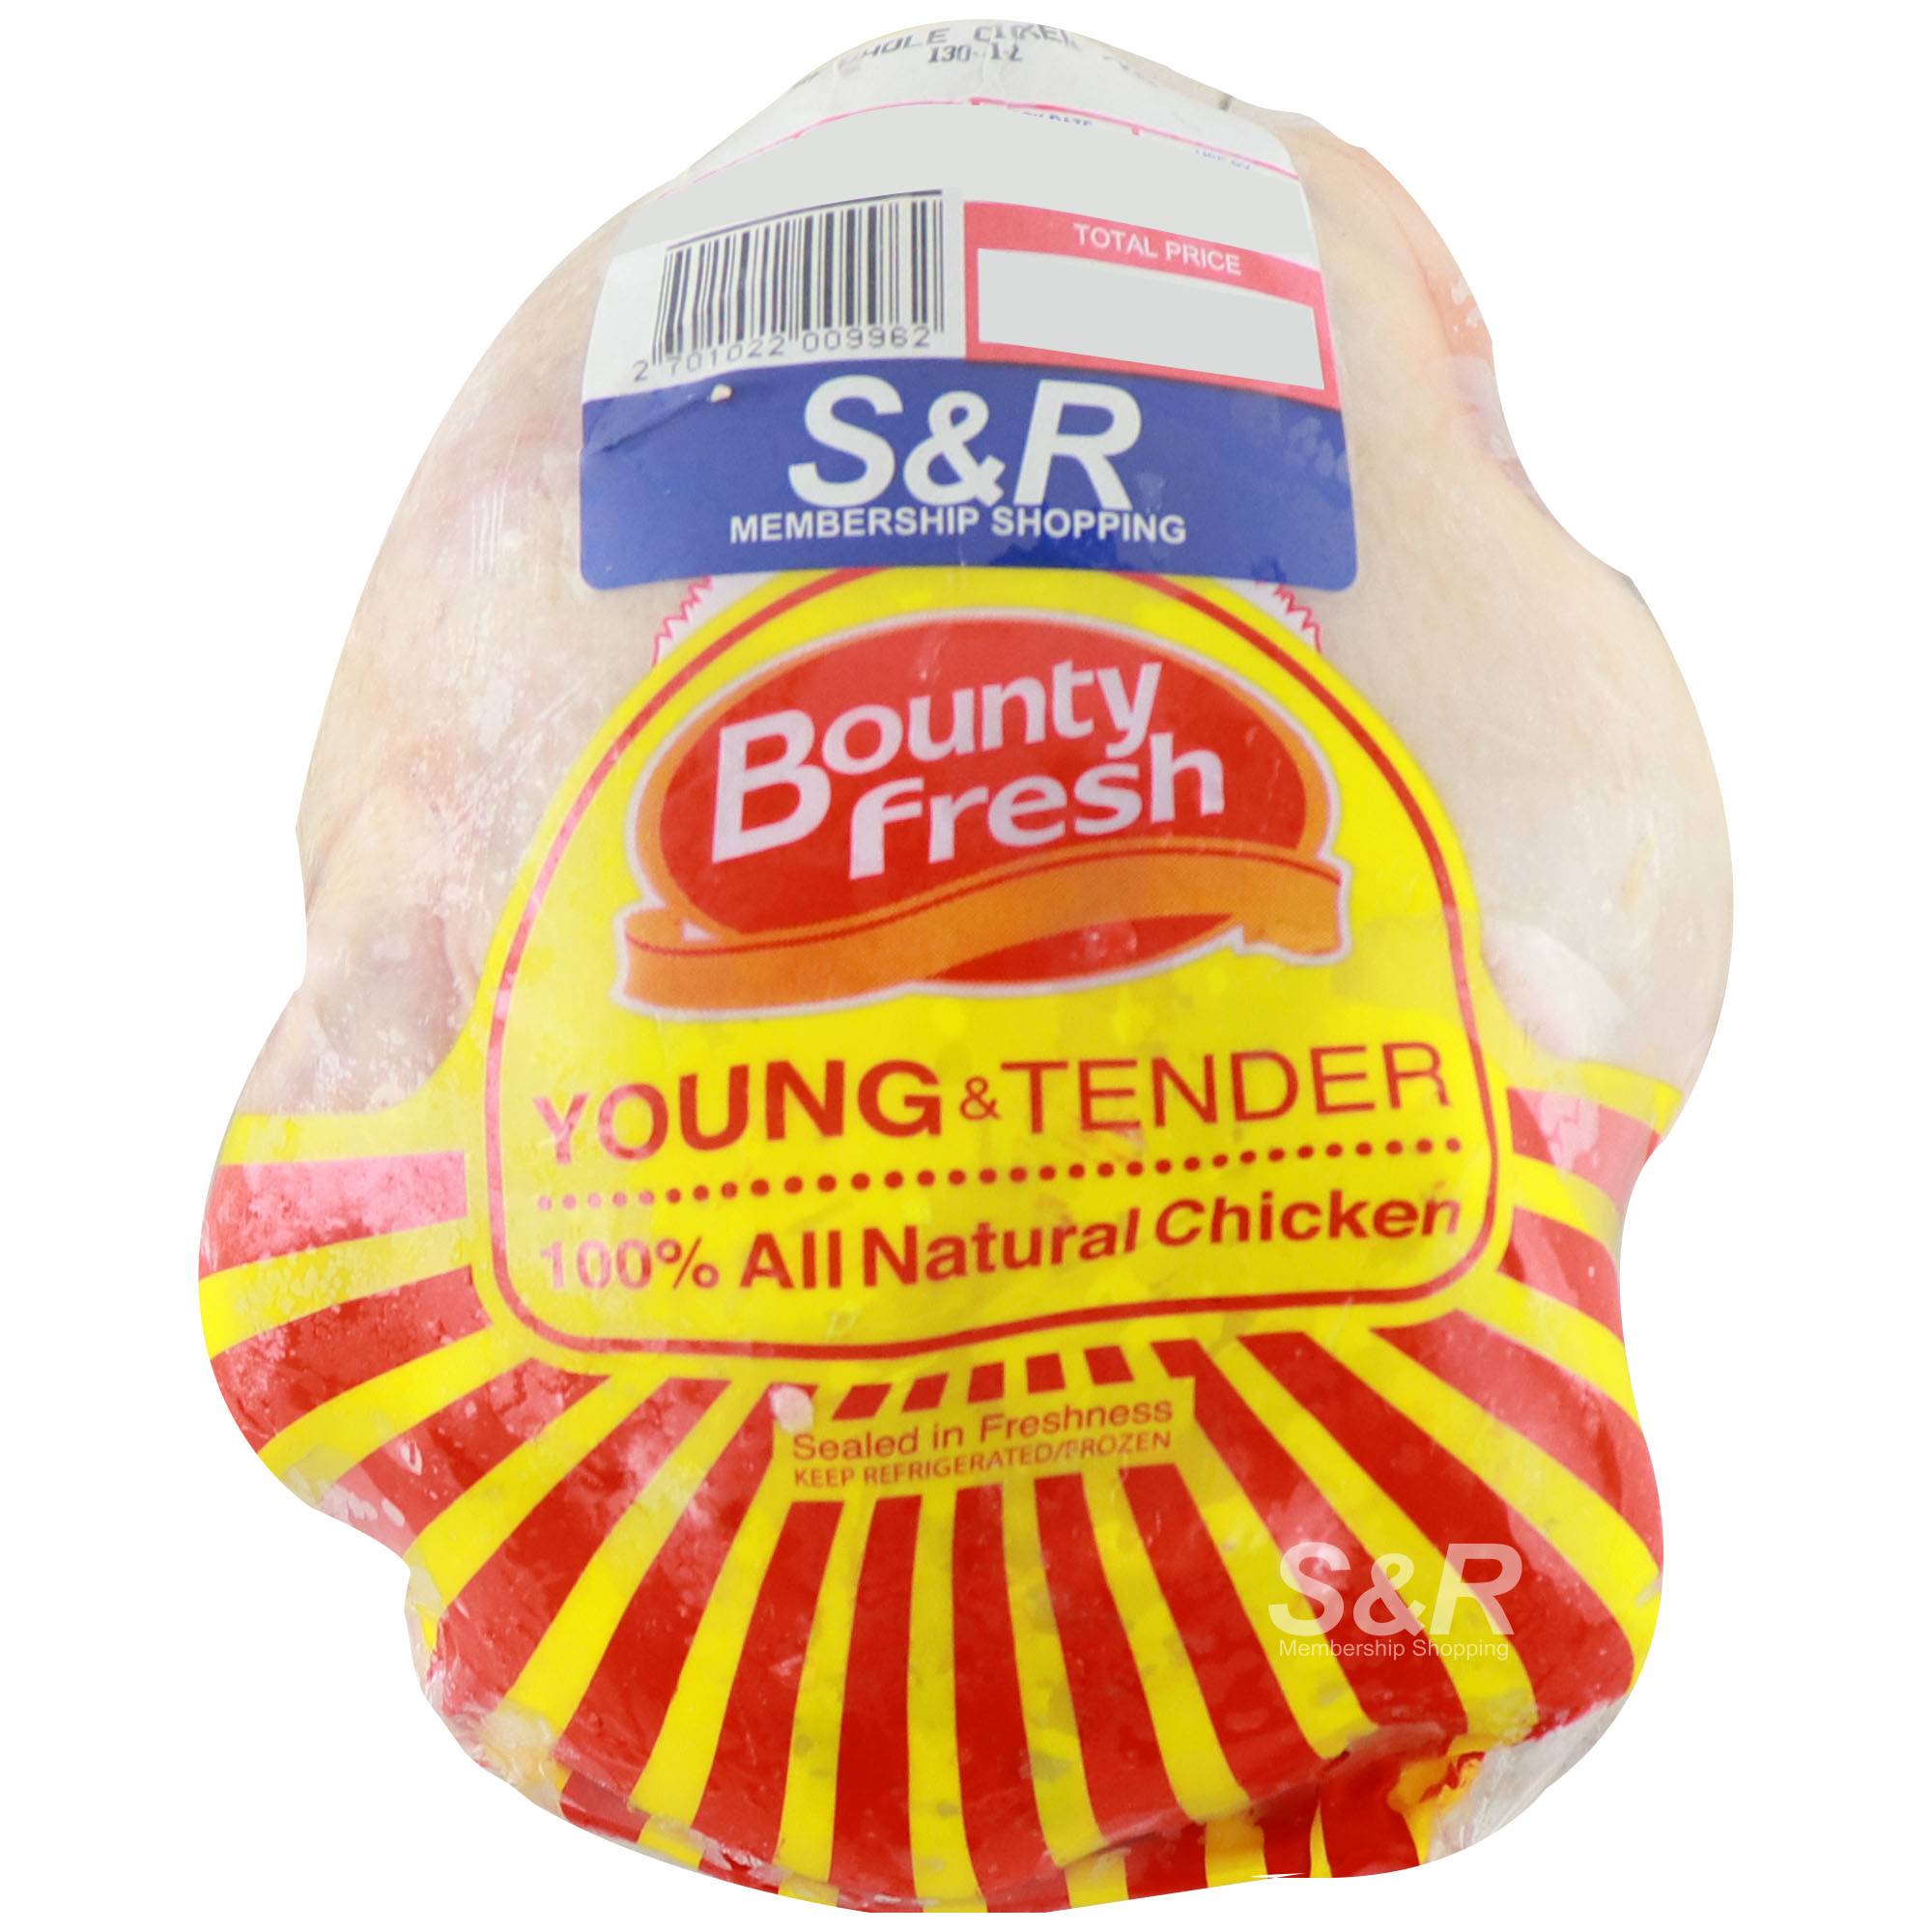 Bounty Fresh Whole young and Tender Chicken approx. 1.5kg